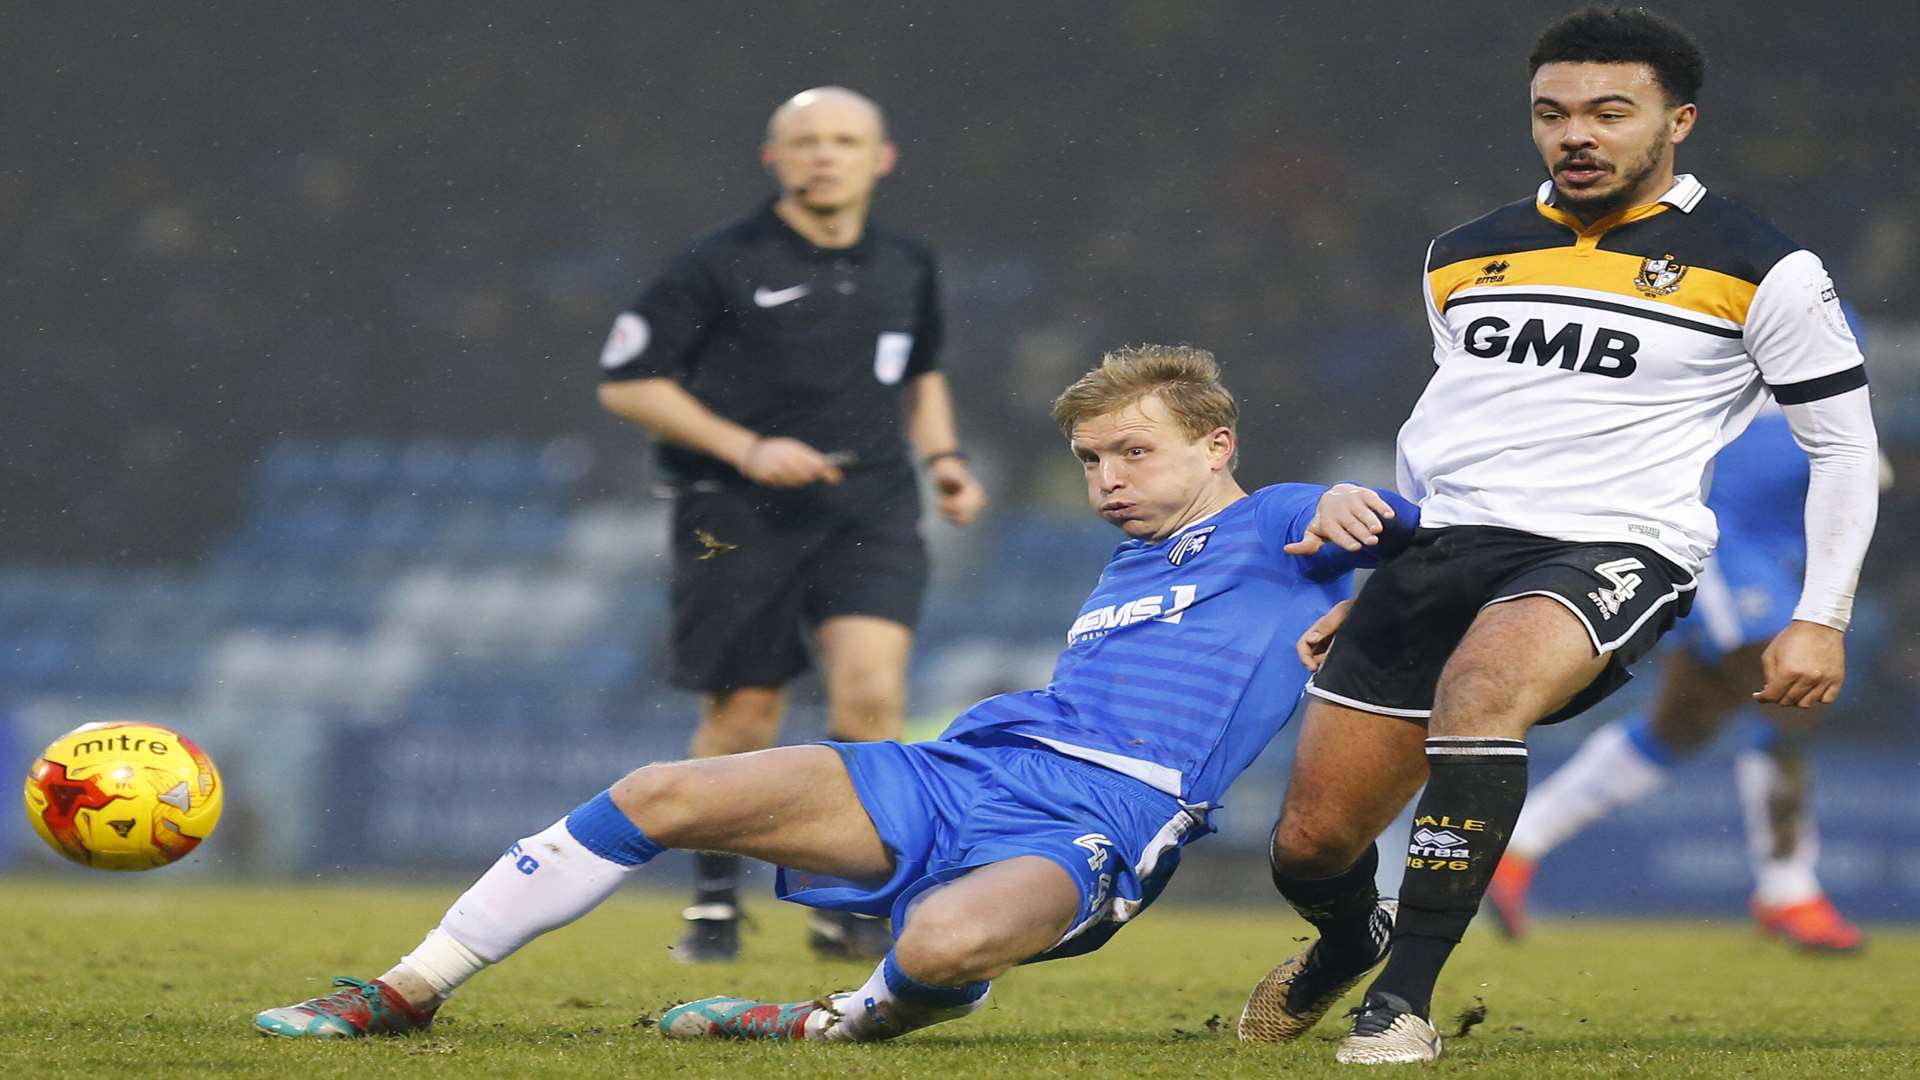 Josh Wright wins the ball back for Gillingham Picture: Andy Jones